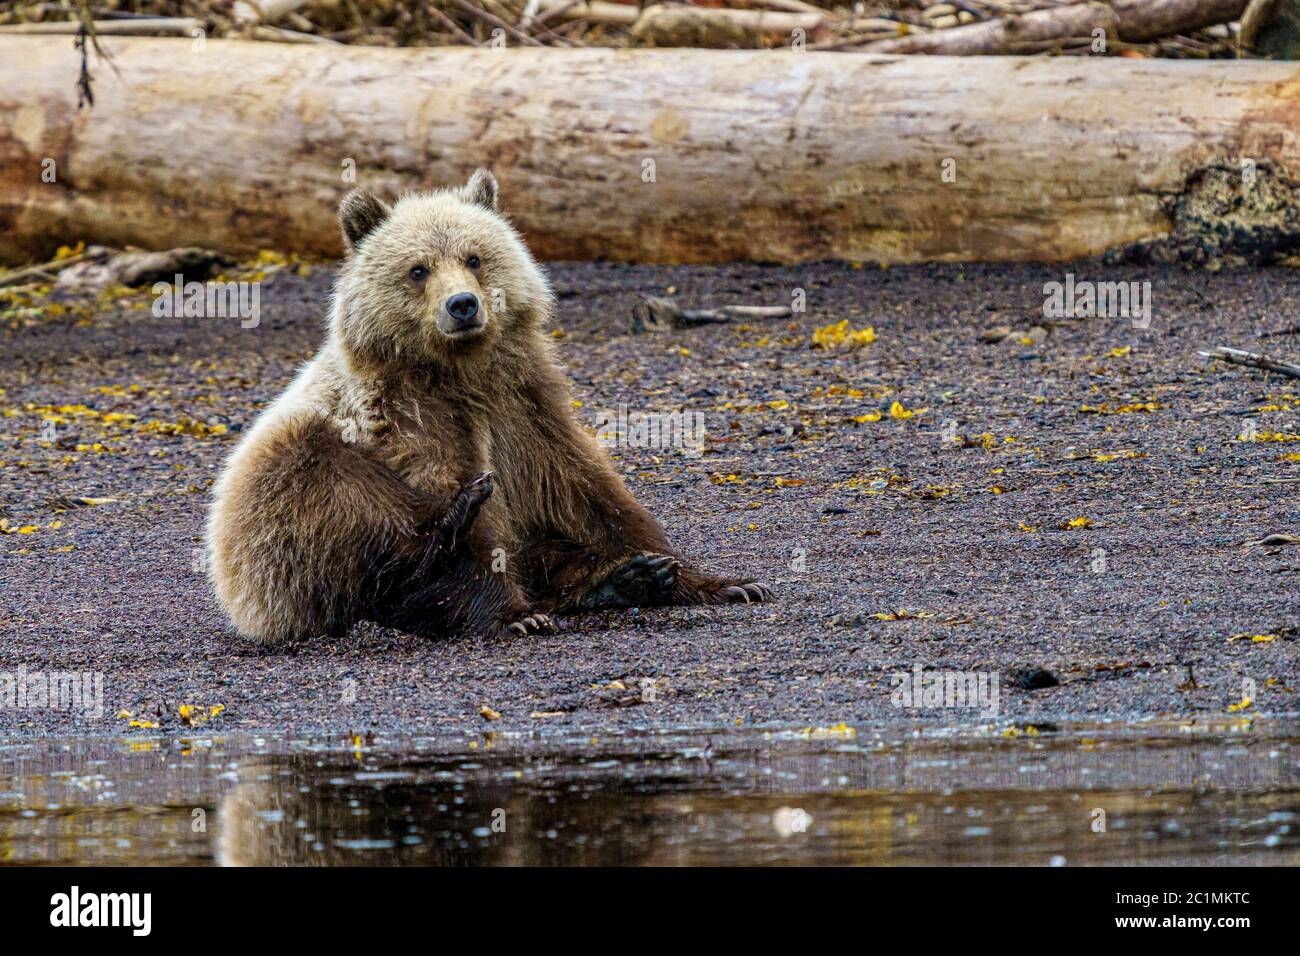 Grizzly bear cub sitting and scratching along the shoreline in Glendale Cove, First Nations Territory, British Columbia, Canada. Stock Photo